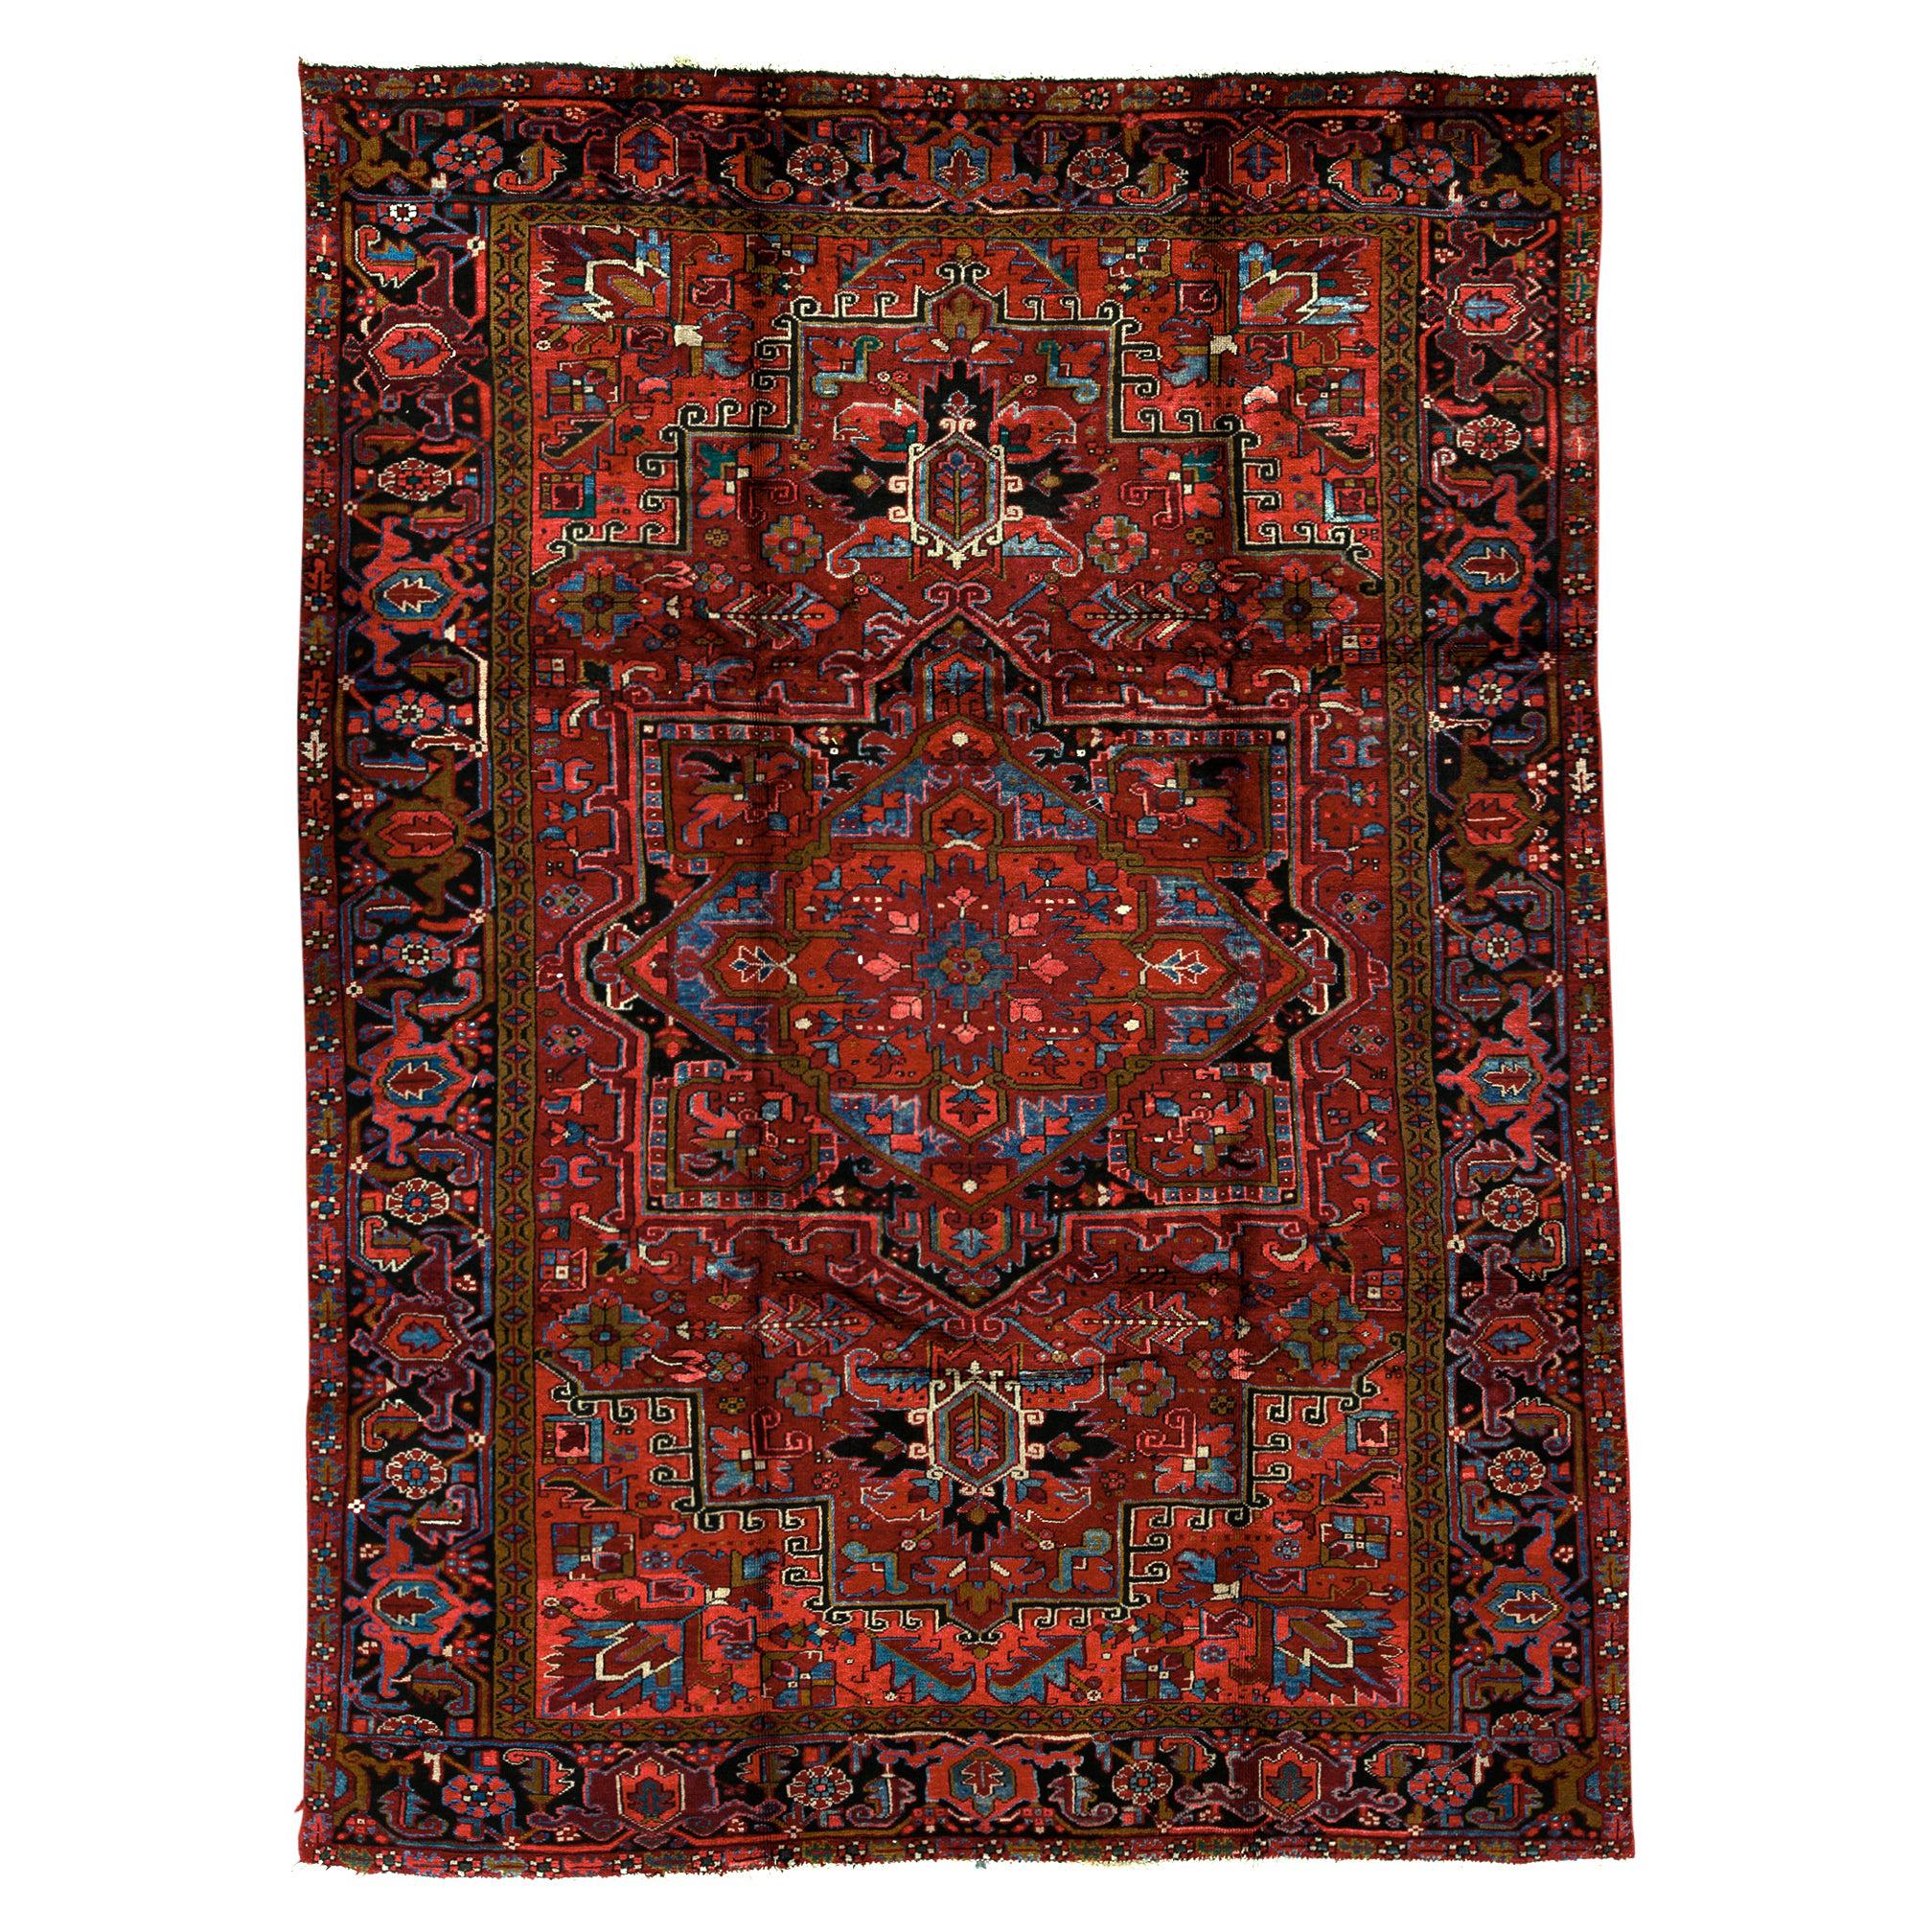   Antique Persian Fine Traditional Handwoven Luxury Wool Red / Black Rug For Sale